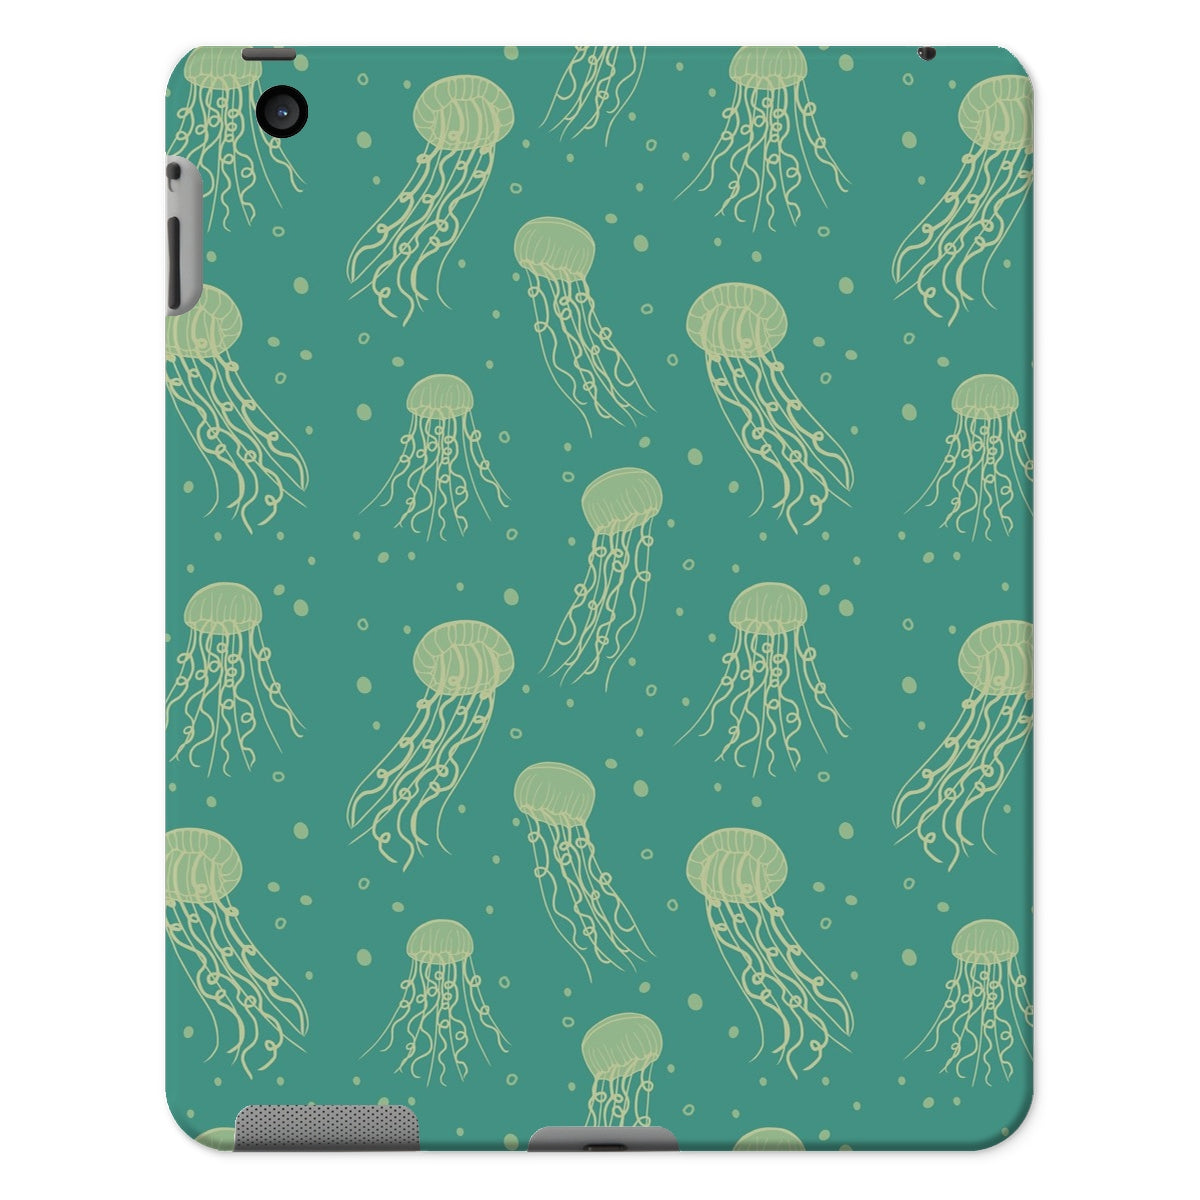 Jellyfish Tablet Cases